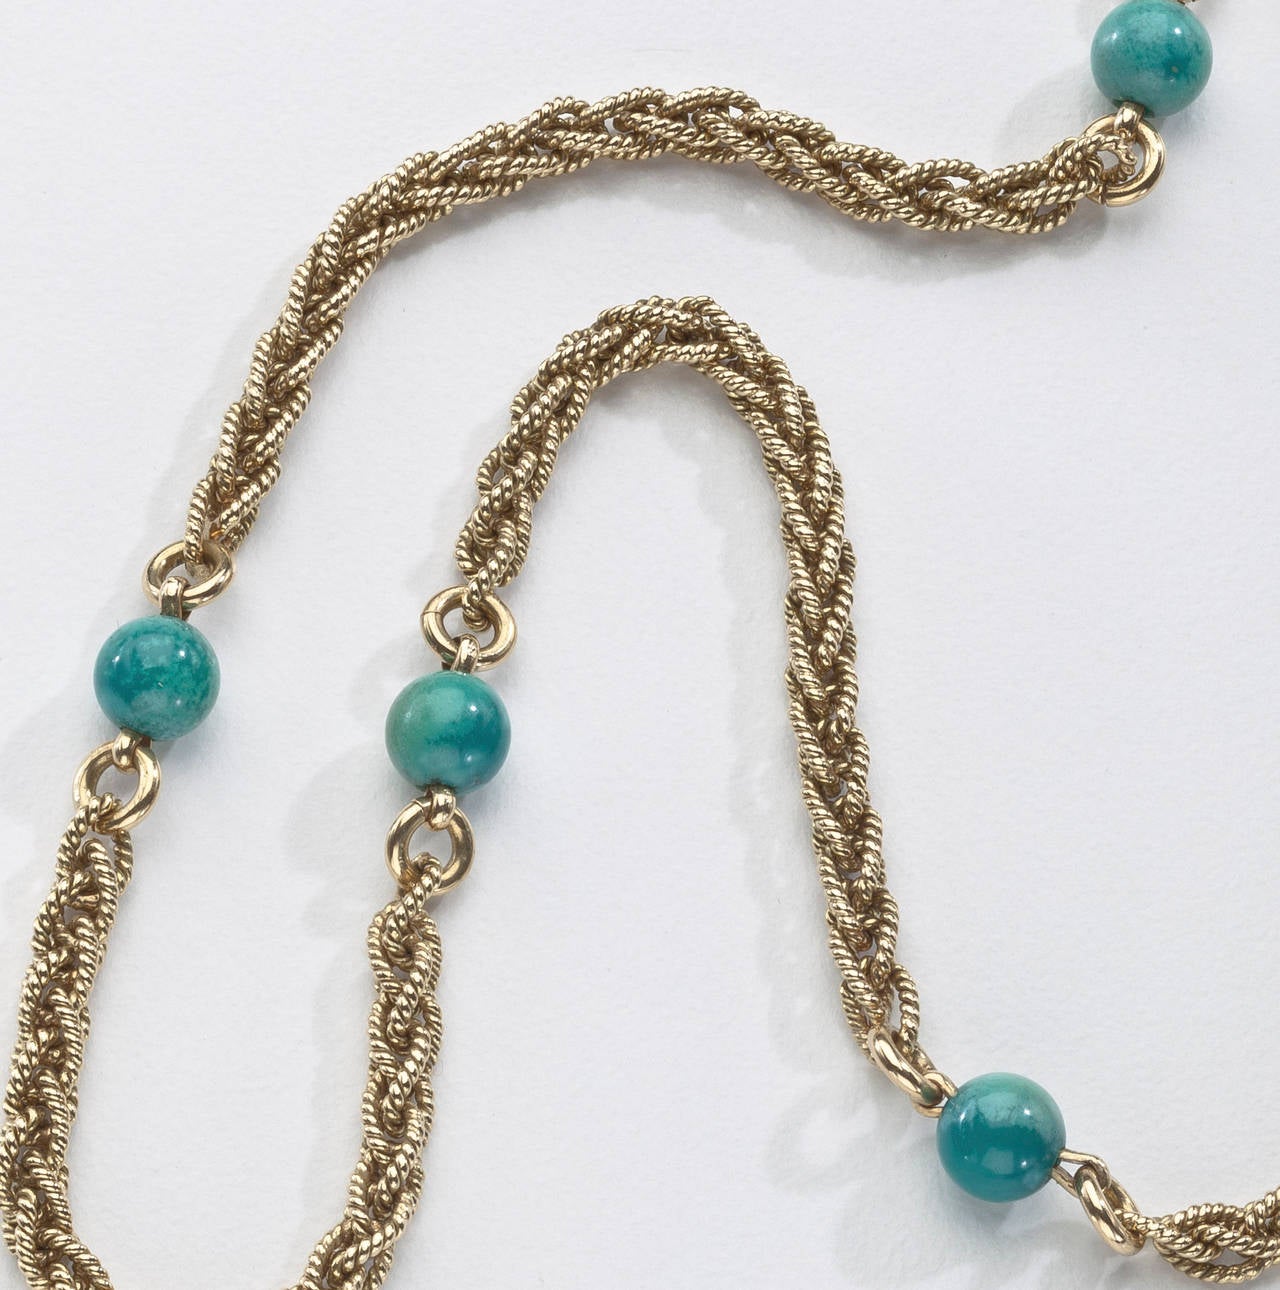 An 18 karat gold rope twist chain by Cartier accented with eight round turquoise spacers.  Signed Cartier Italy K18 with the inventory #2139.  The chain measures 24.25 inches long.